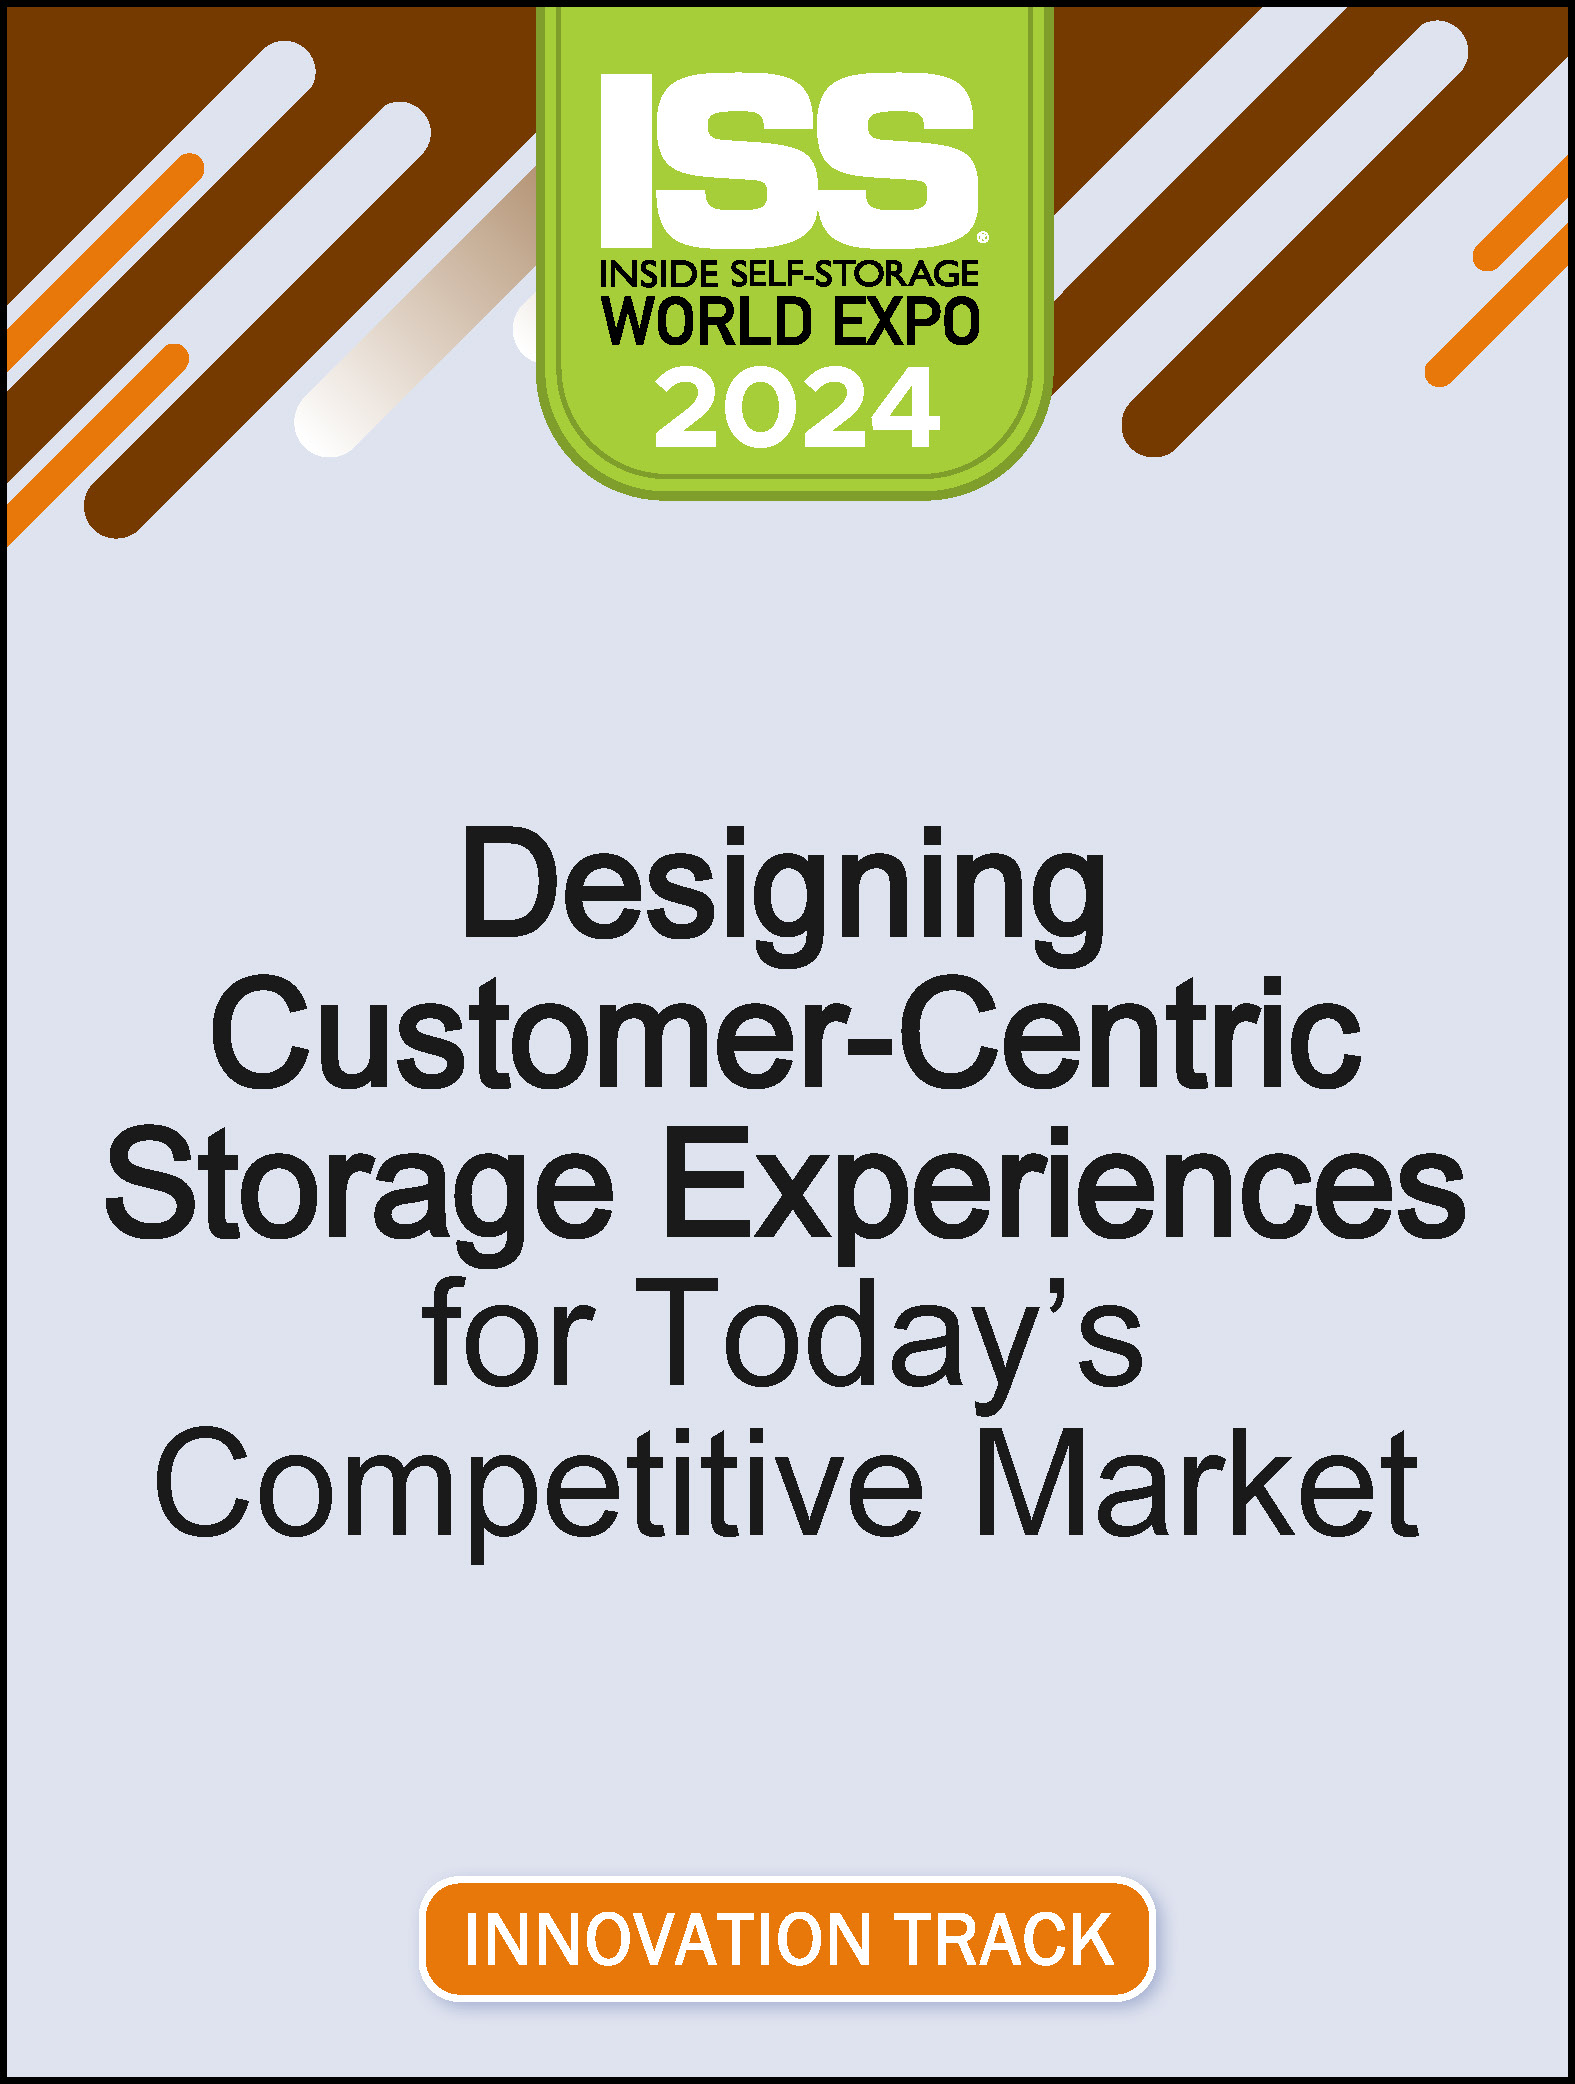 Video Pre-Order PDF - Designing Customer-Centric Self-Storage Experiences for Today’s Competitive Market